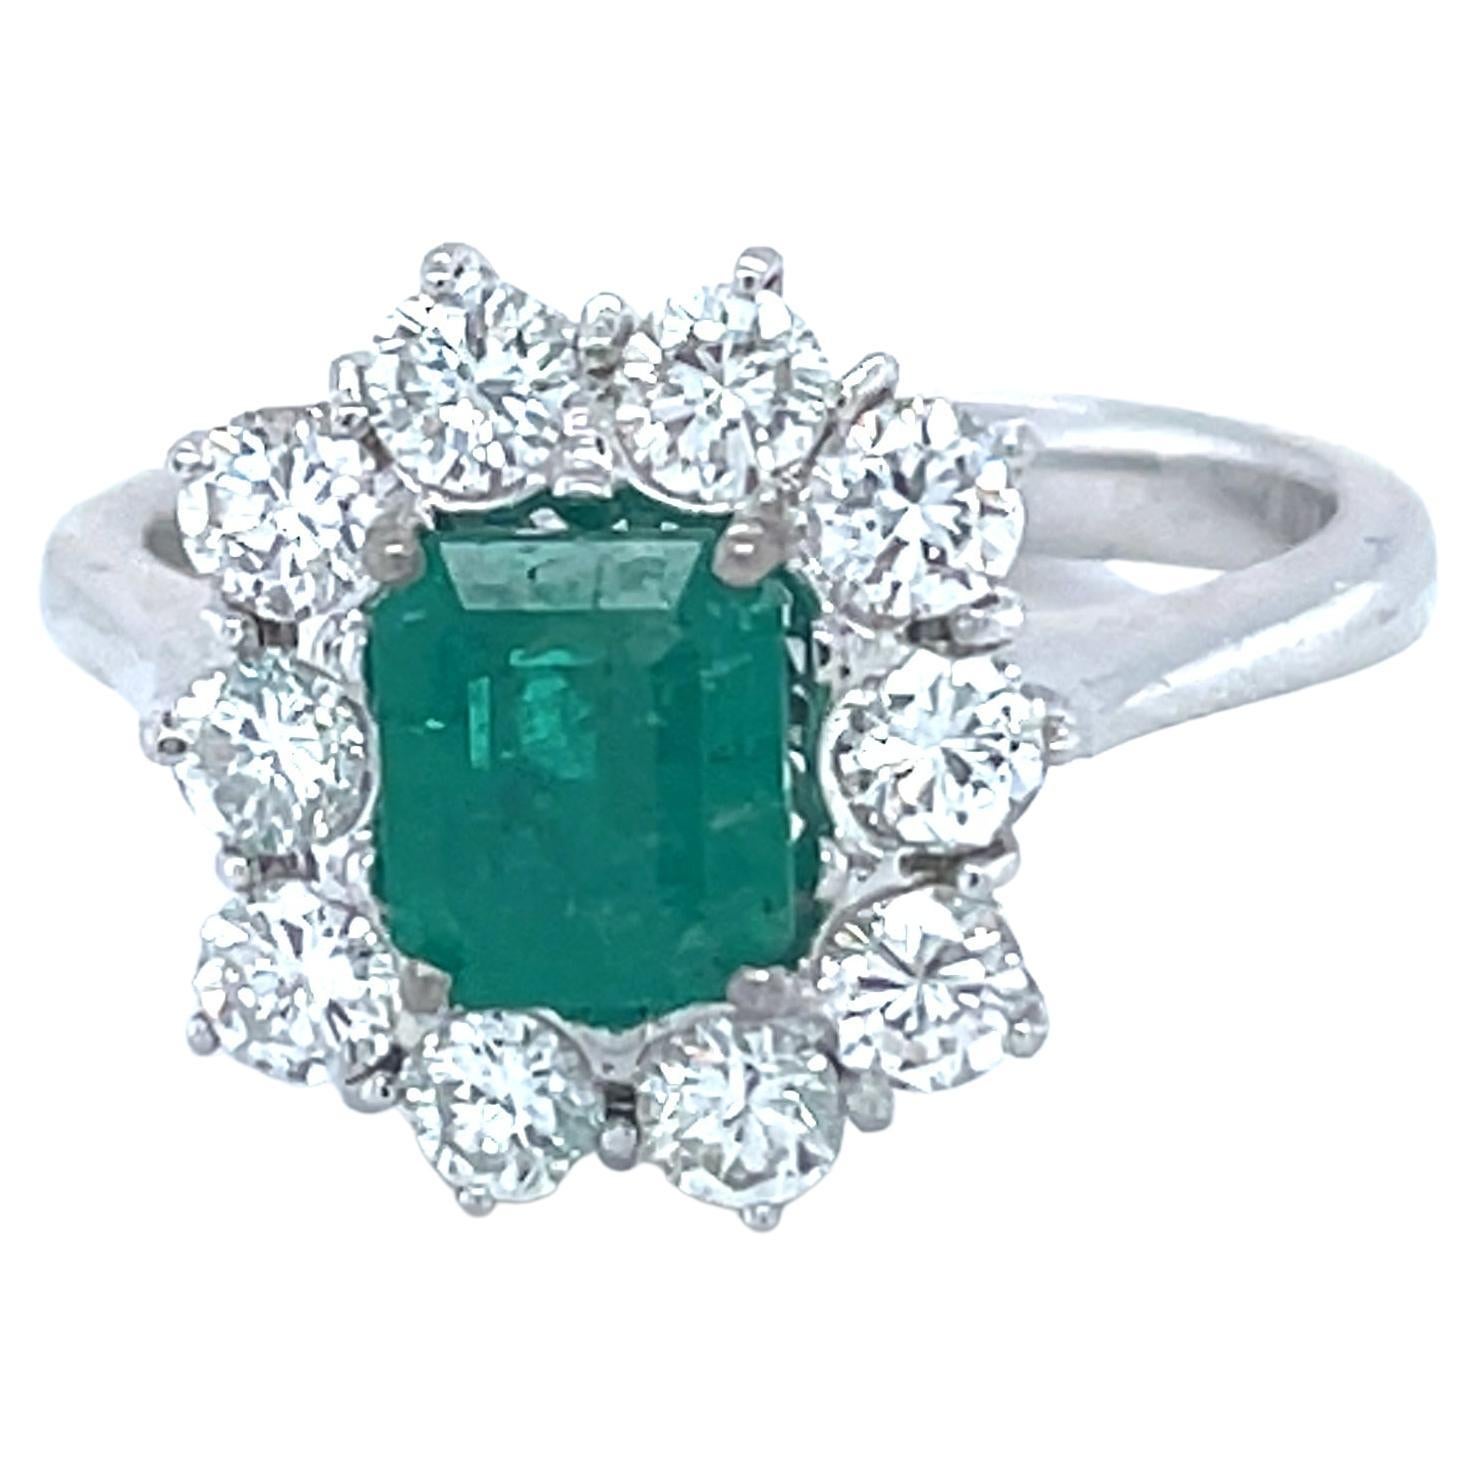 This 18K white gold classy ring is from our Timeless Collection. It is made of a cushion shape emerald 1.01 Carat decorated by colourless round diamonds in total of 0.96 Carat. Total metal weight is 5.10 gr. Beautiful piece of jewellery!

The